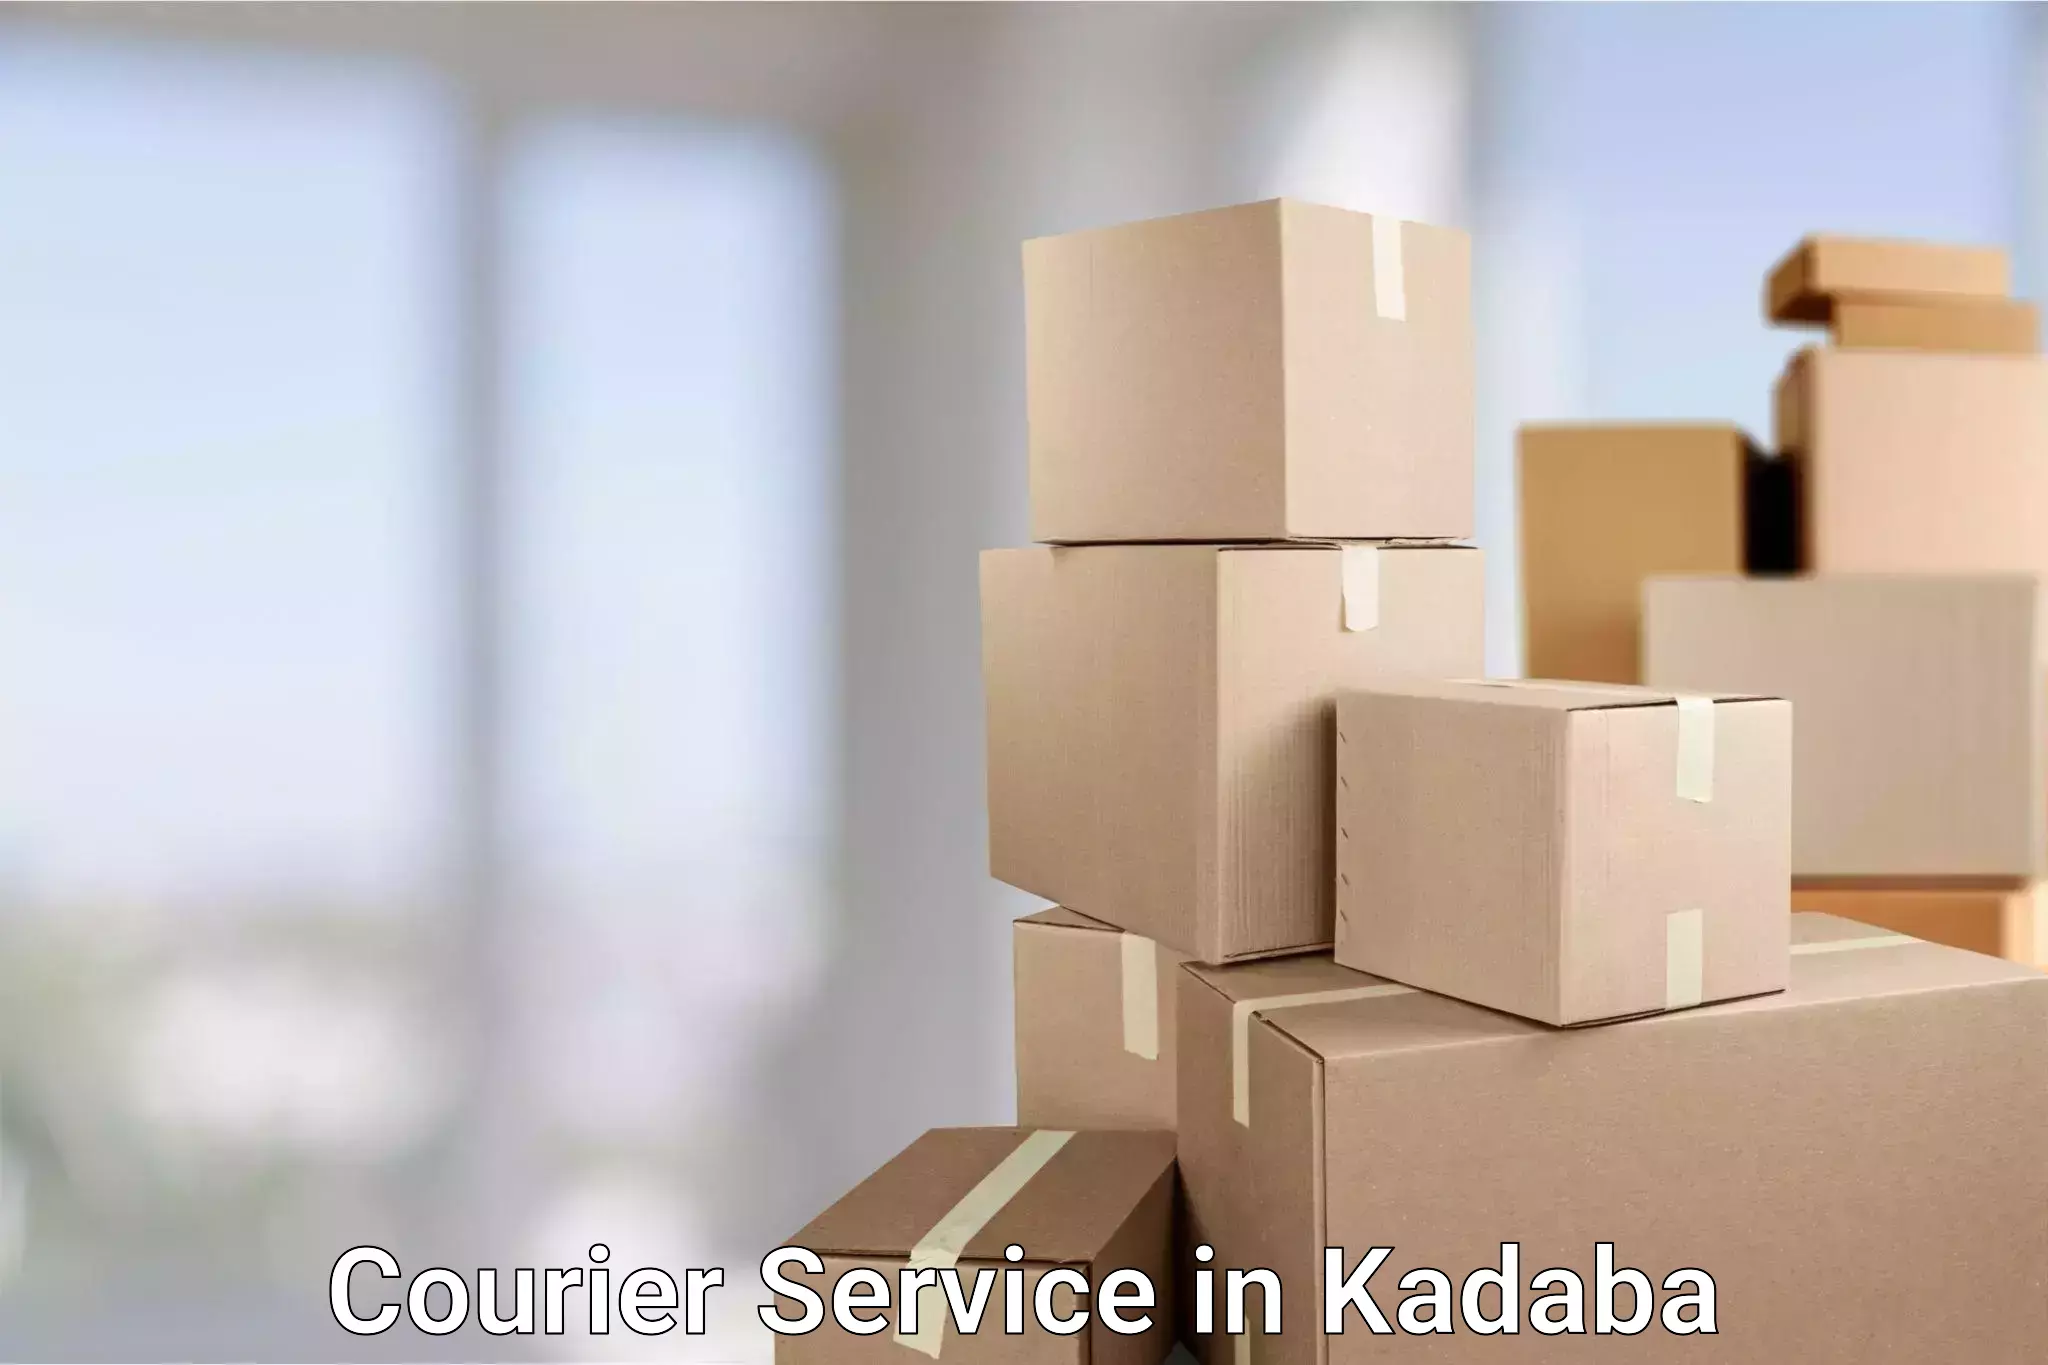 Next-day freight services in Kadaba